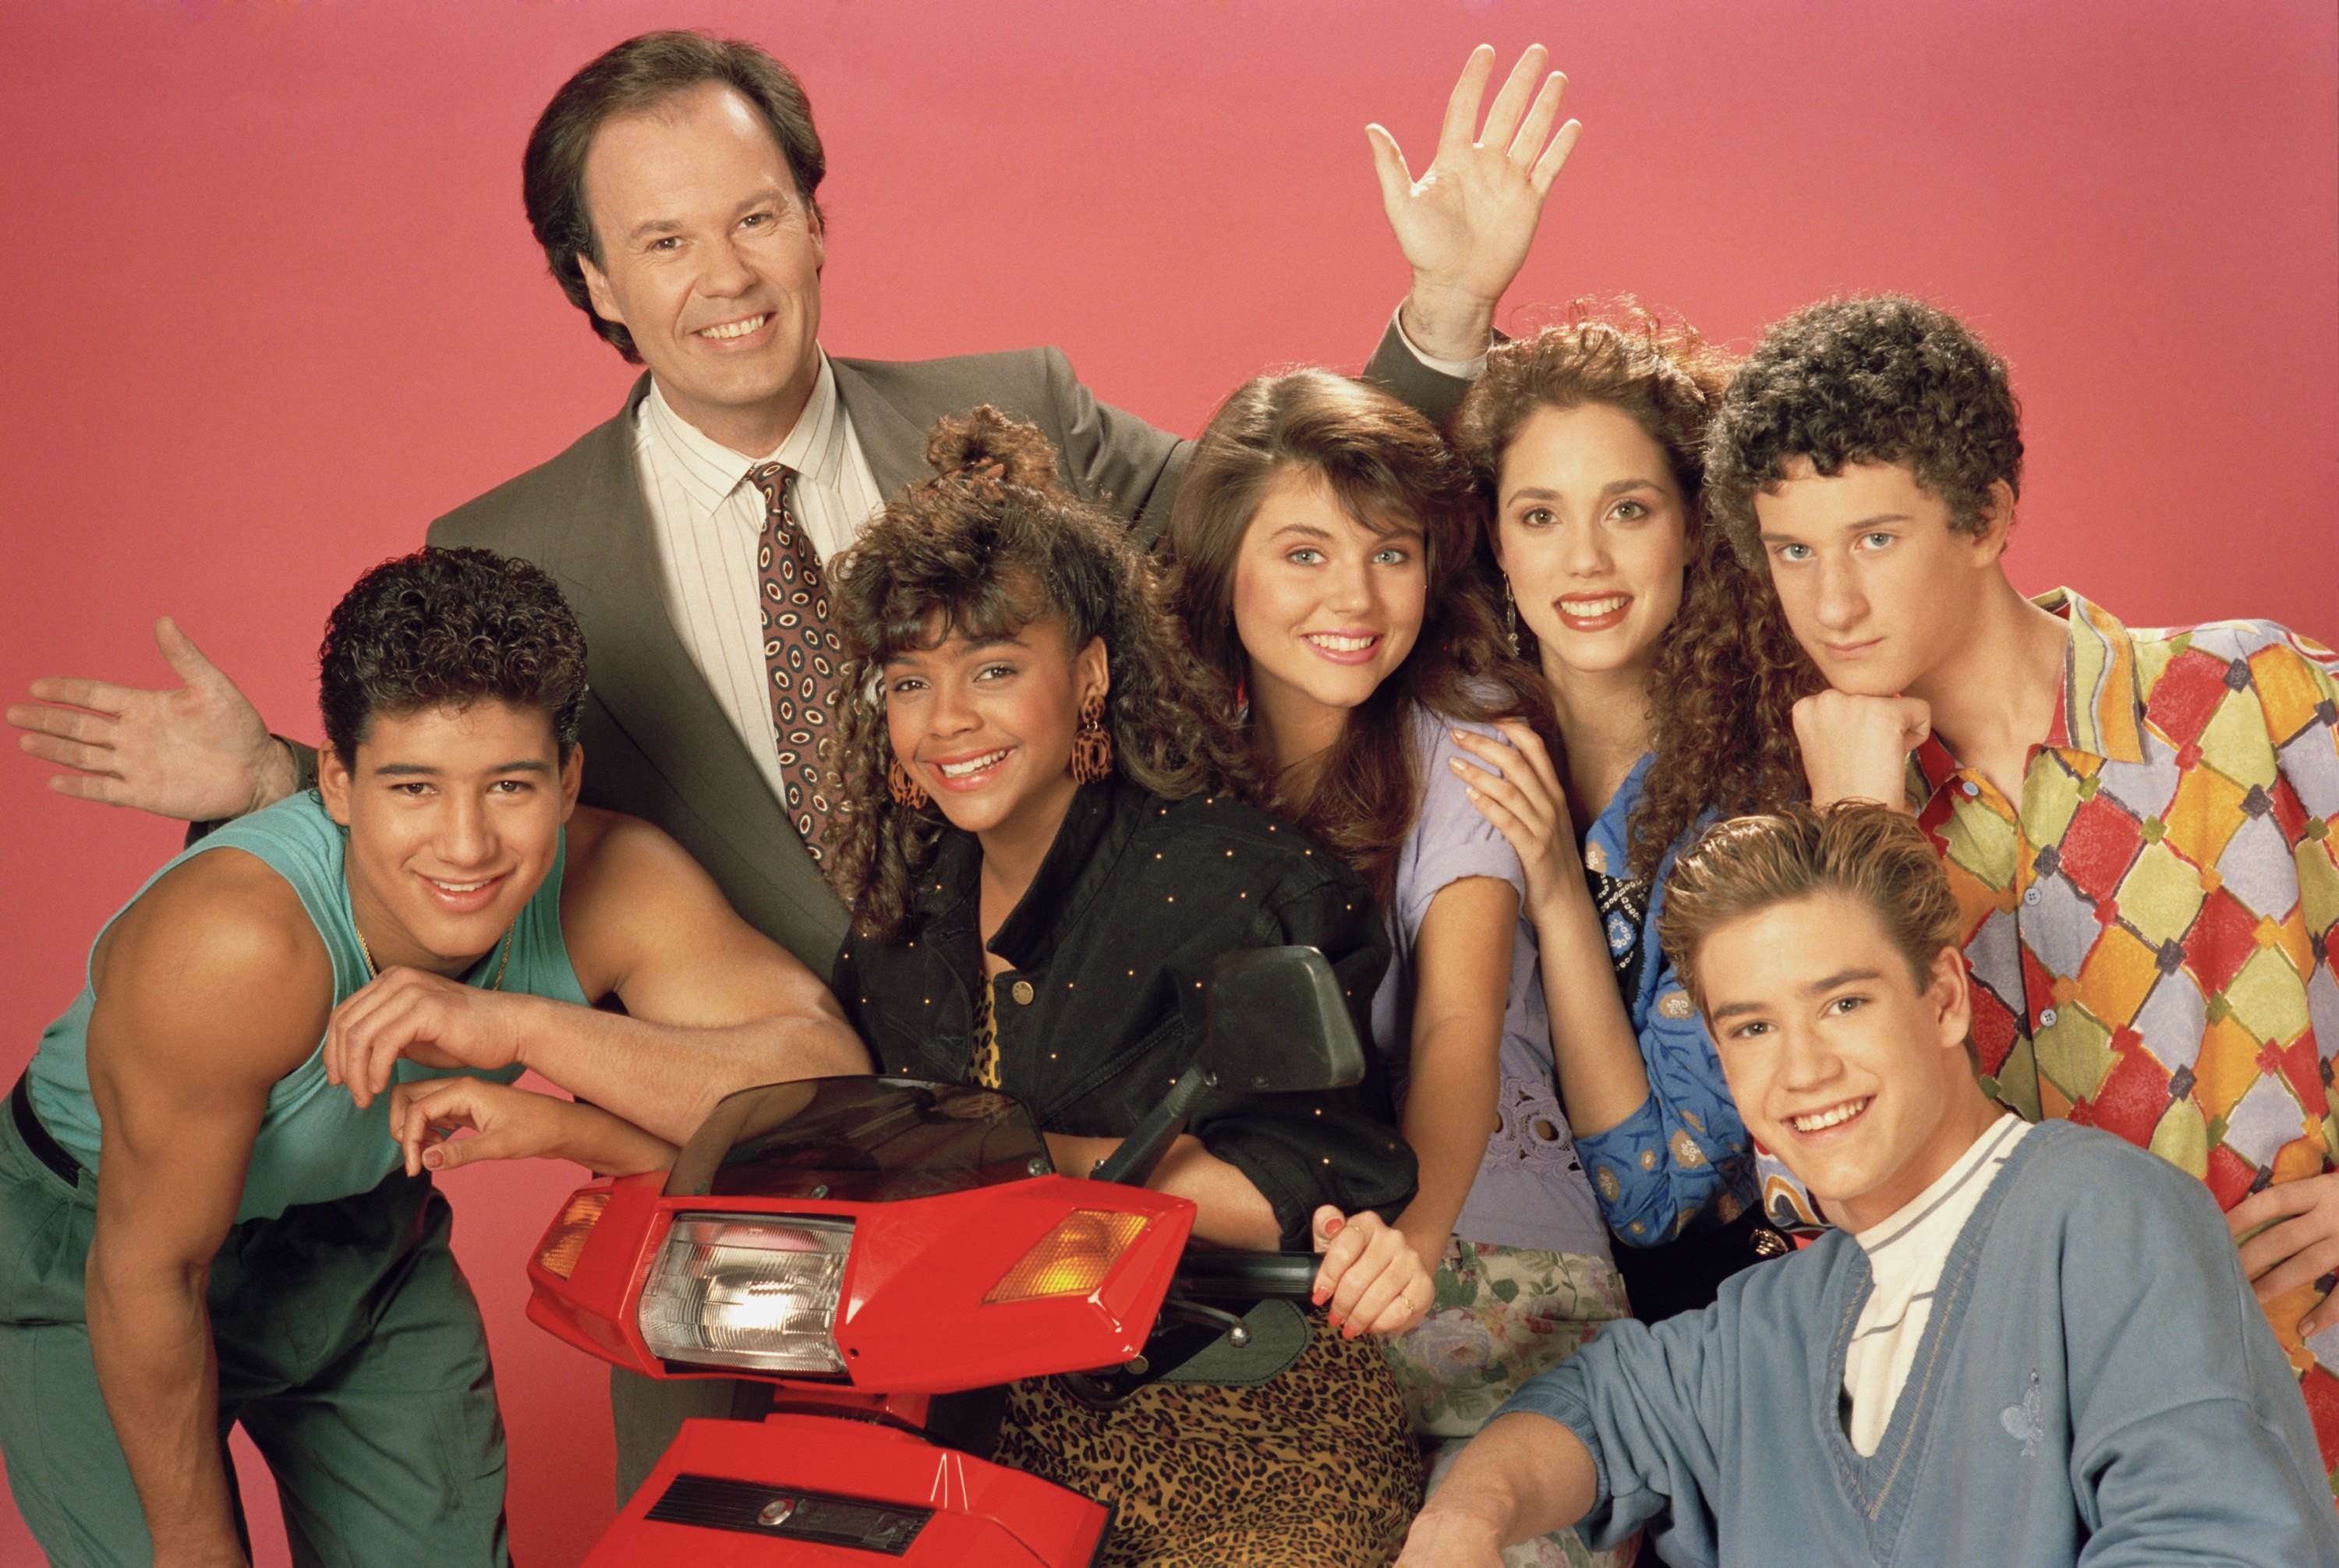 Mario López in Saved by the Bell